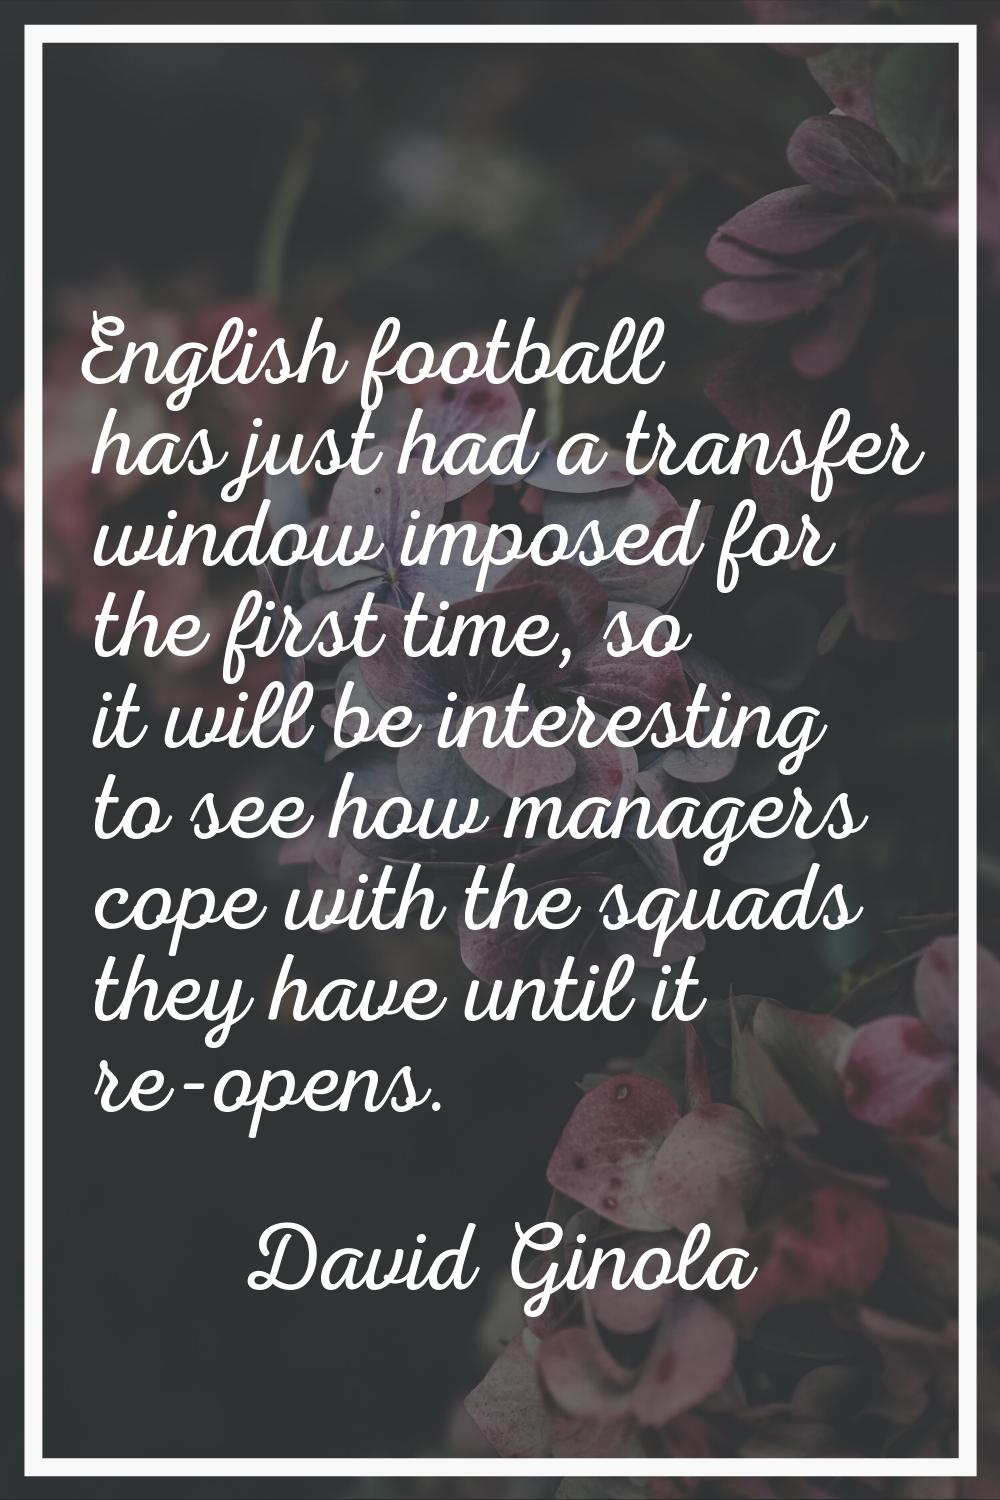 English football has just had a transfer window imposed for the first time, so it will be interesti